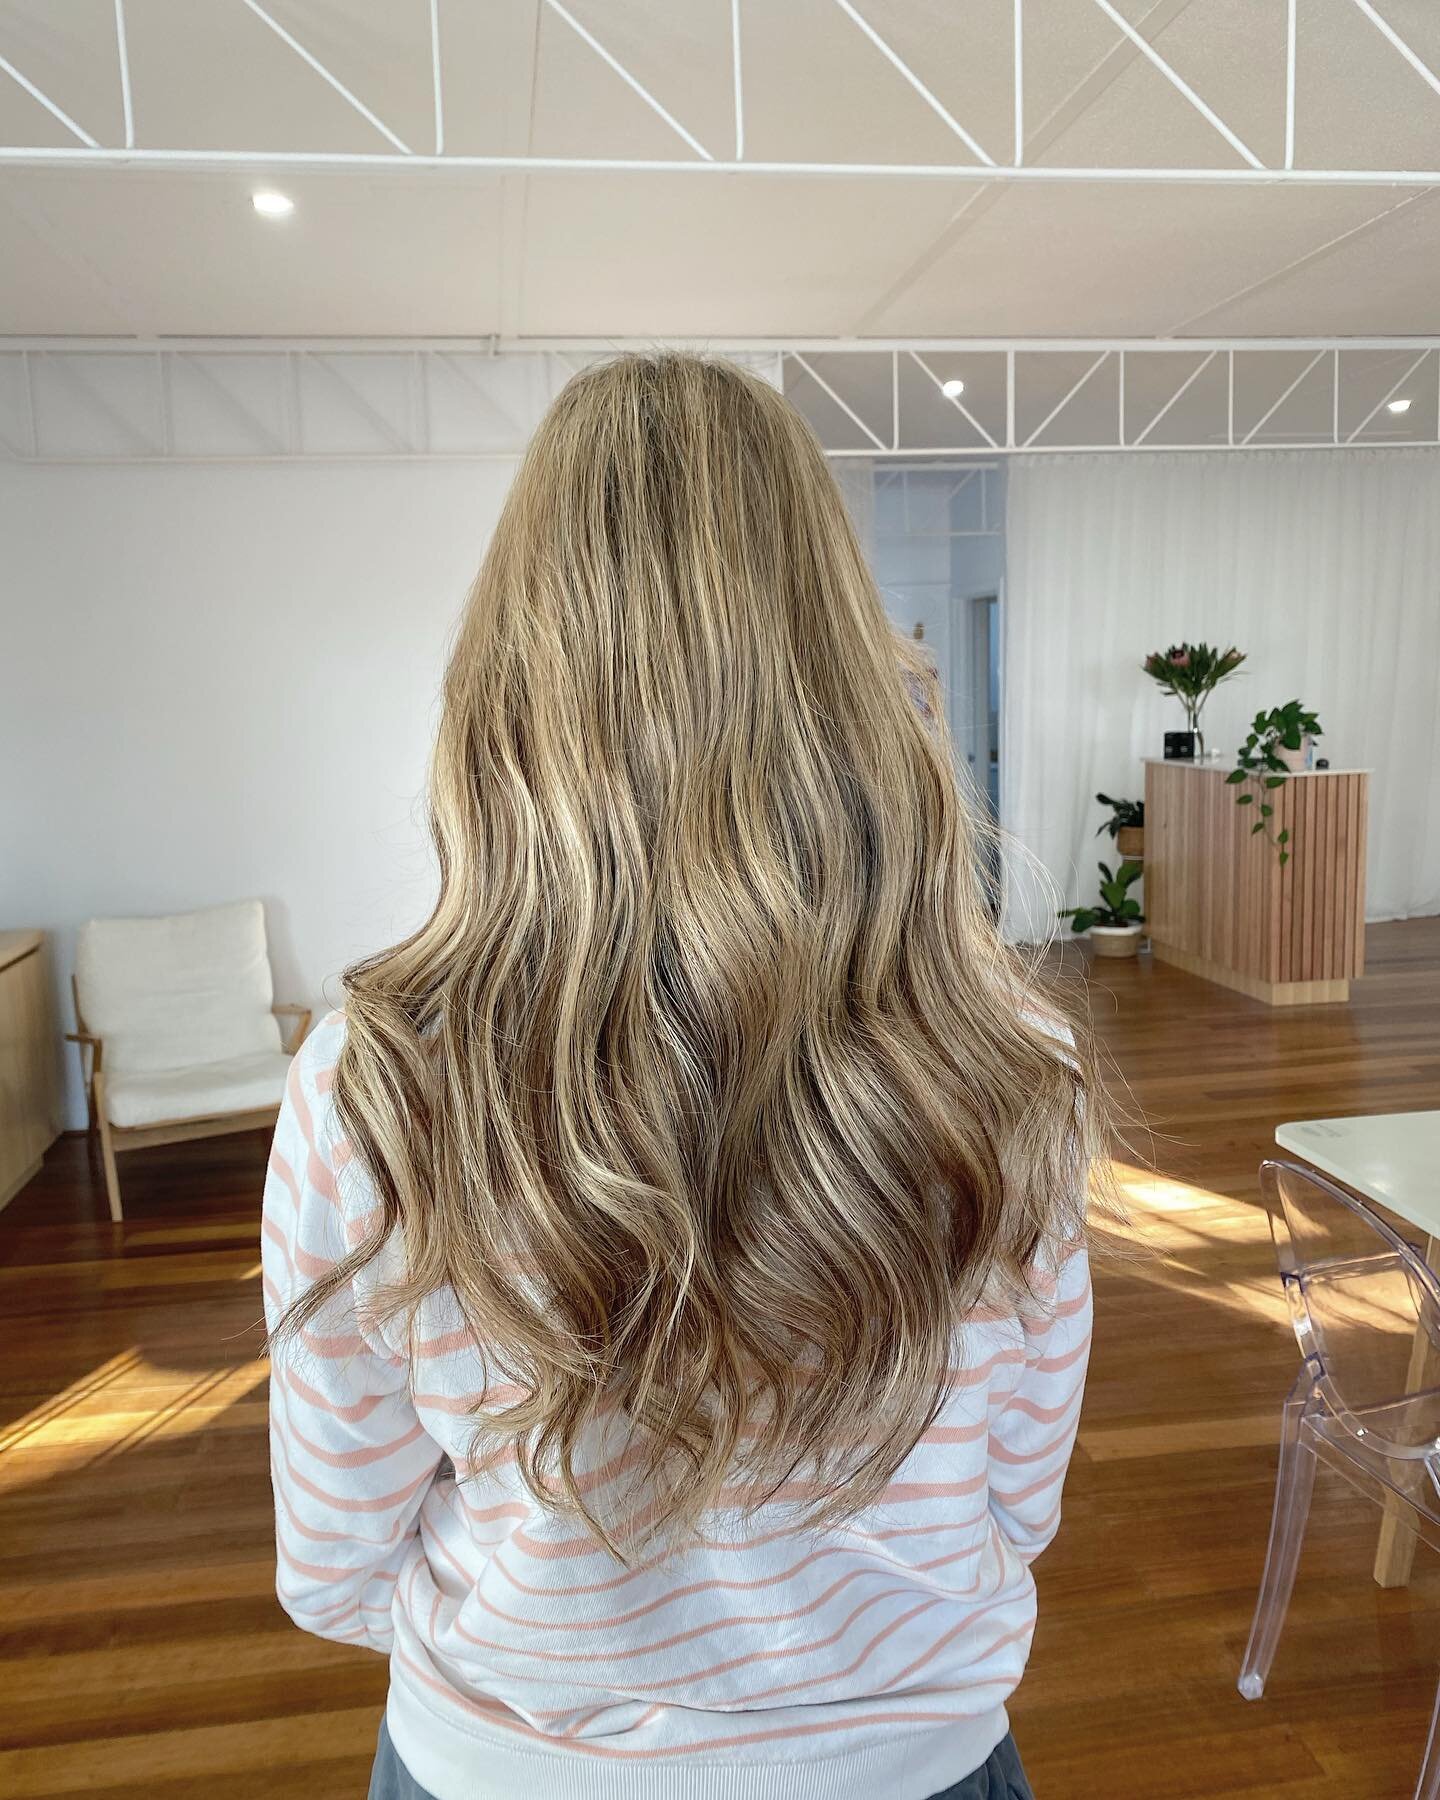 ✨ A little transformation, it&rsquo;s amazing how natural and comfortable extensions are now. Book in for your complimentary consultation to find out what works best for you ✨